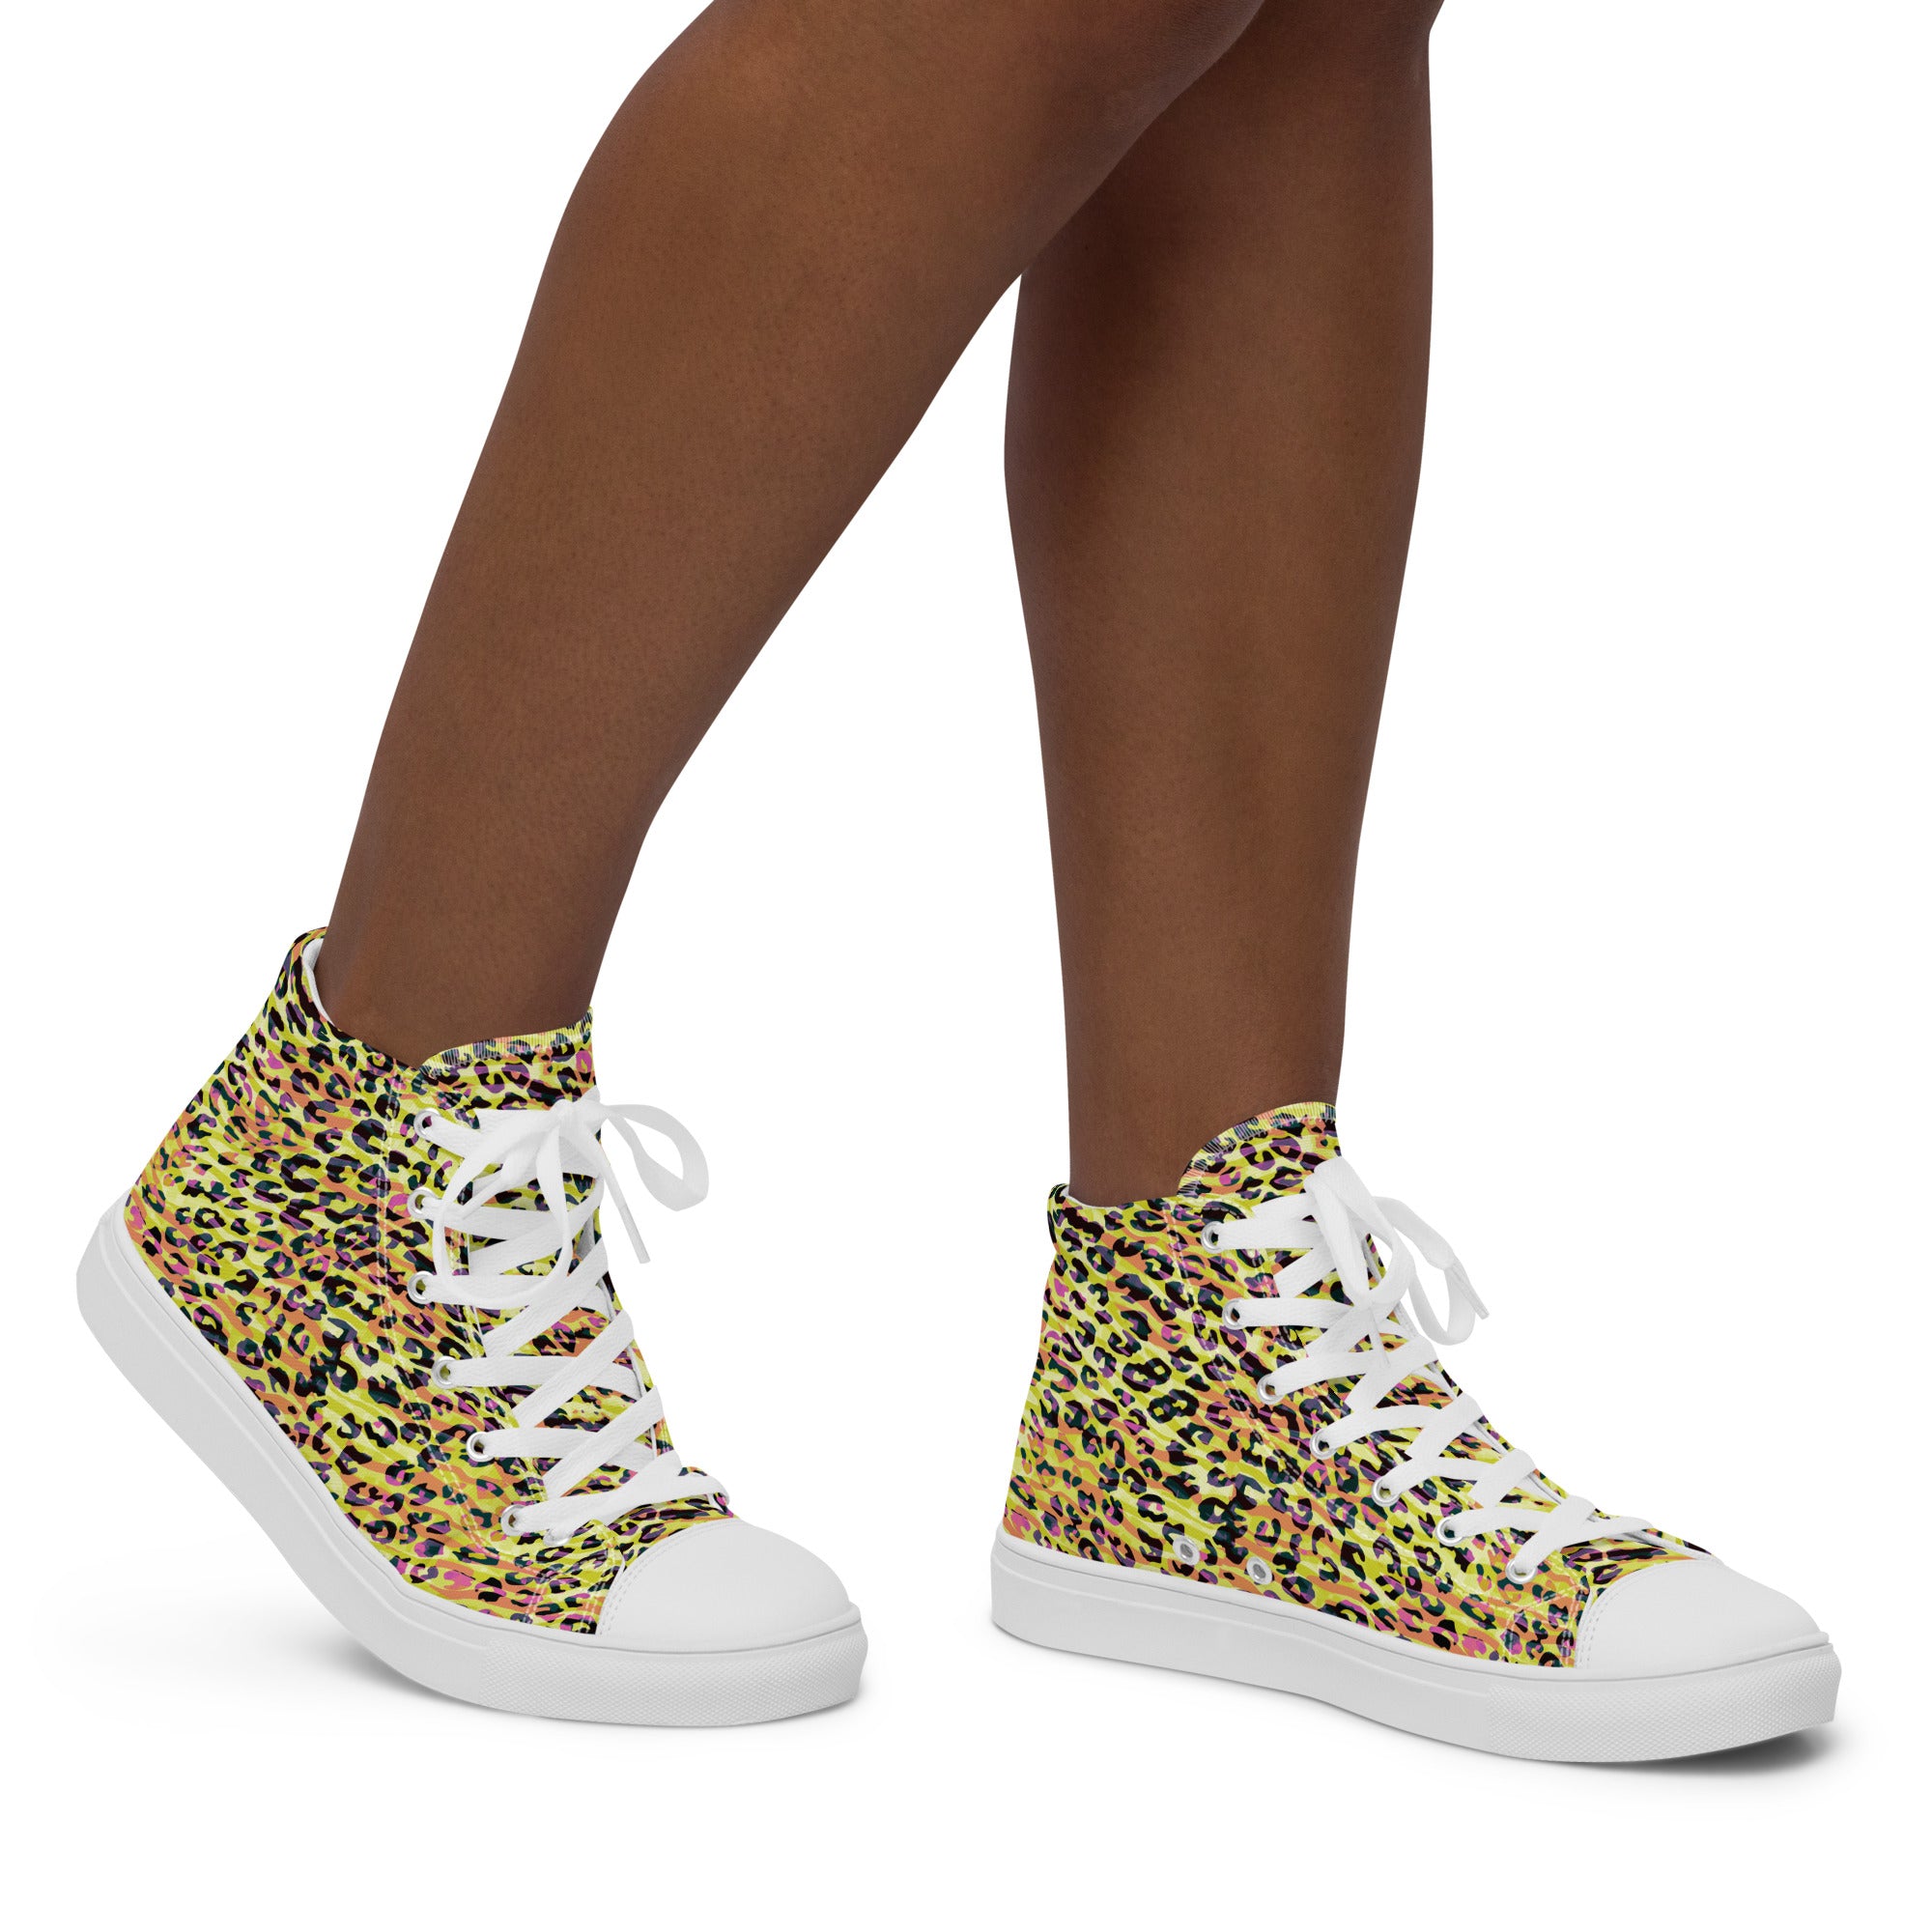 Women’s high top canvas shoes- Zebra and Leopard Print Yellow with Orange